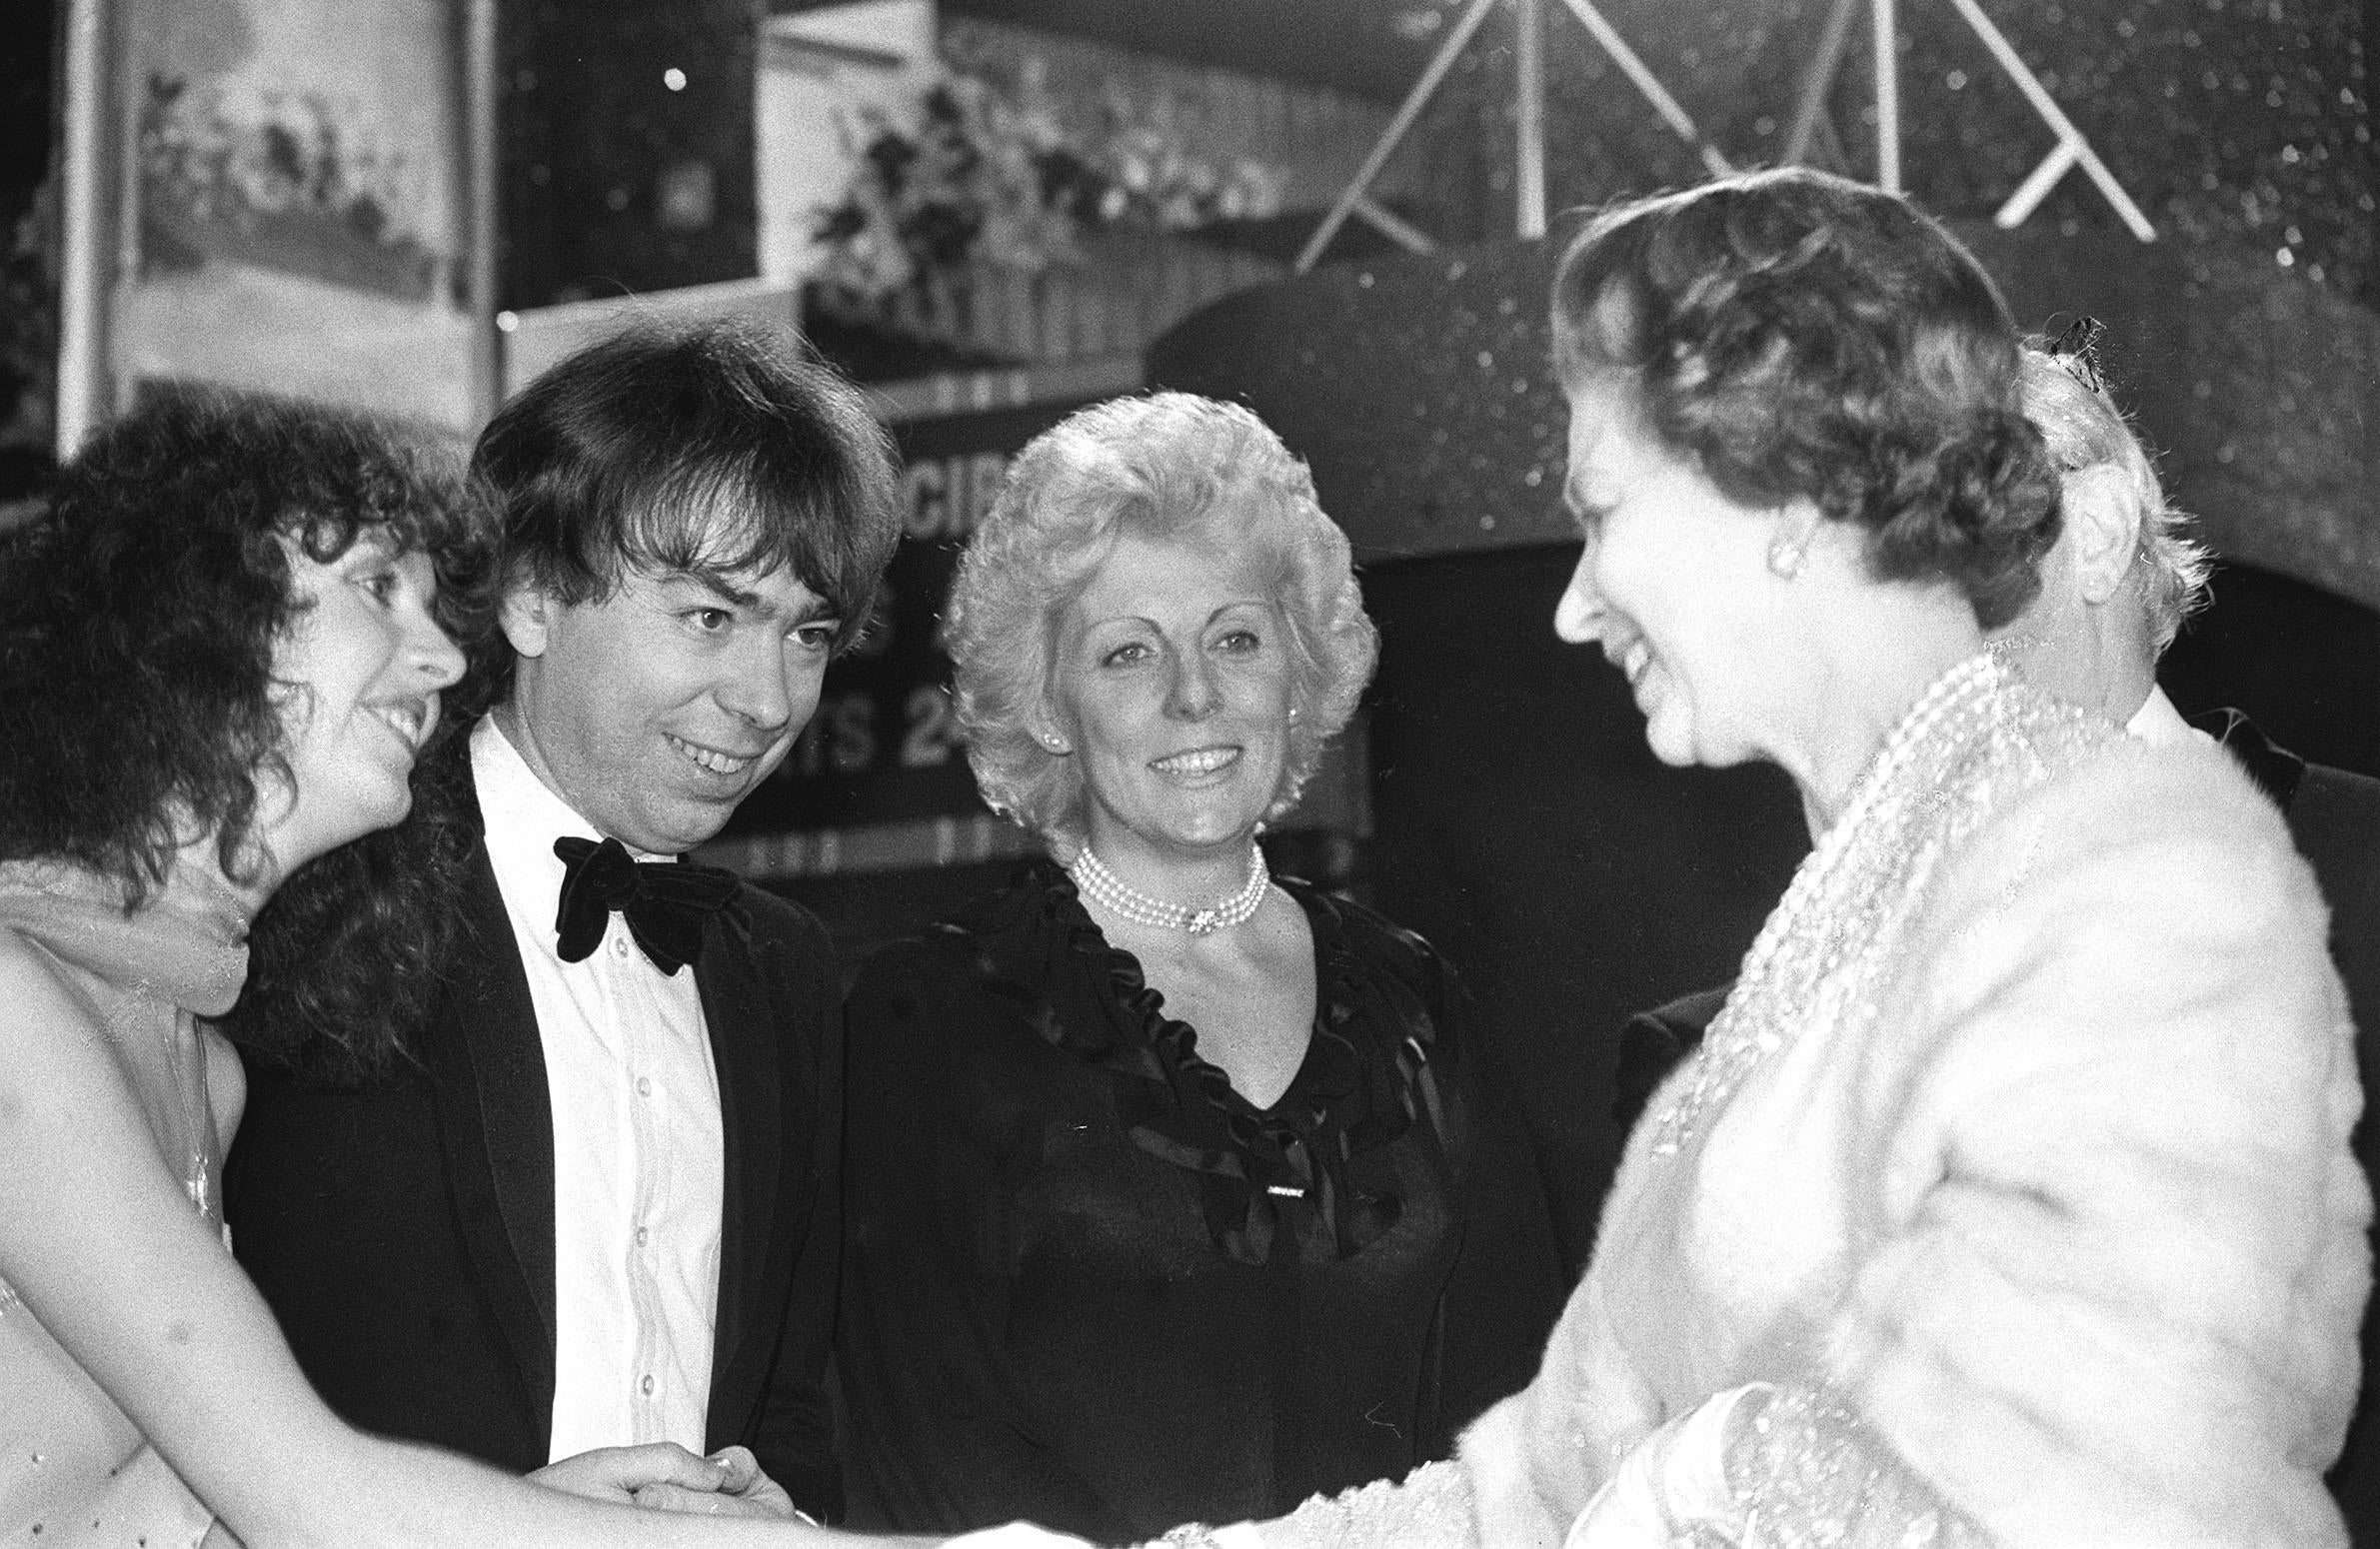 The Queen and composer Andrew Lloyd Webber at the Apollo Theatre, Victoria, London, in 1984 (Ron Bell/PA)